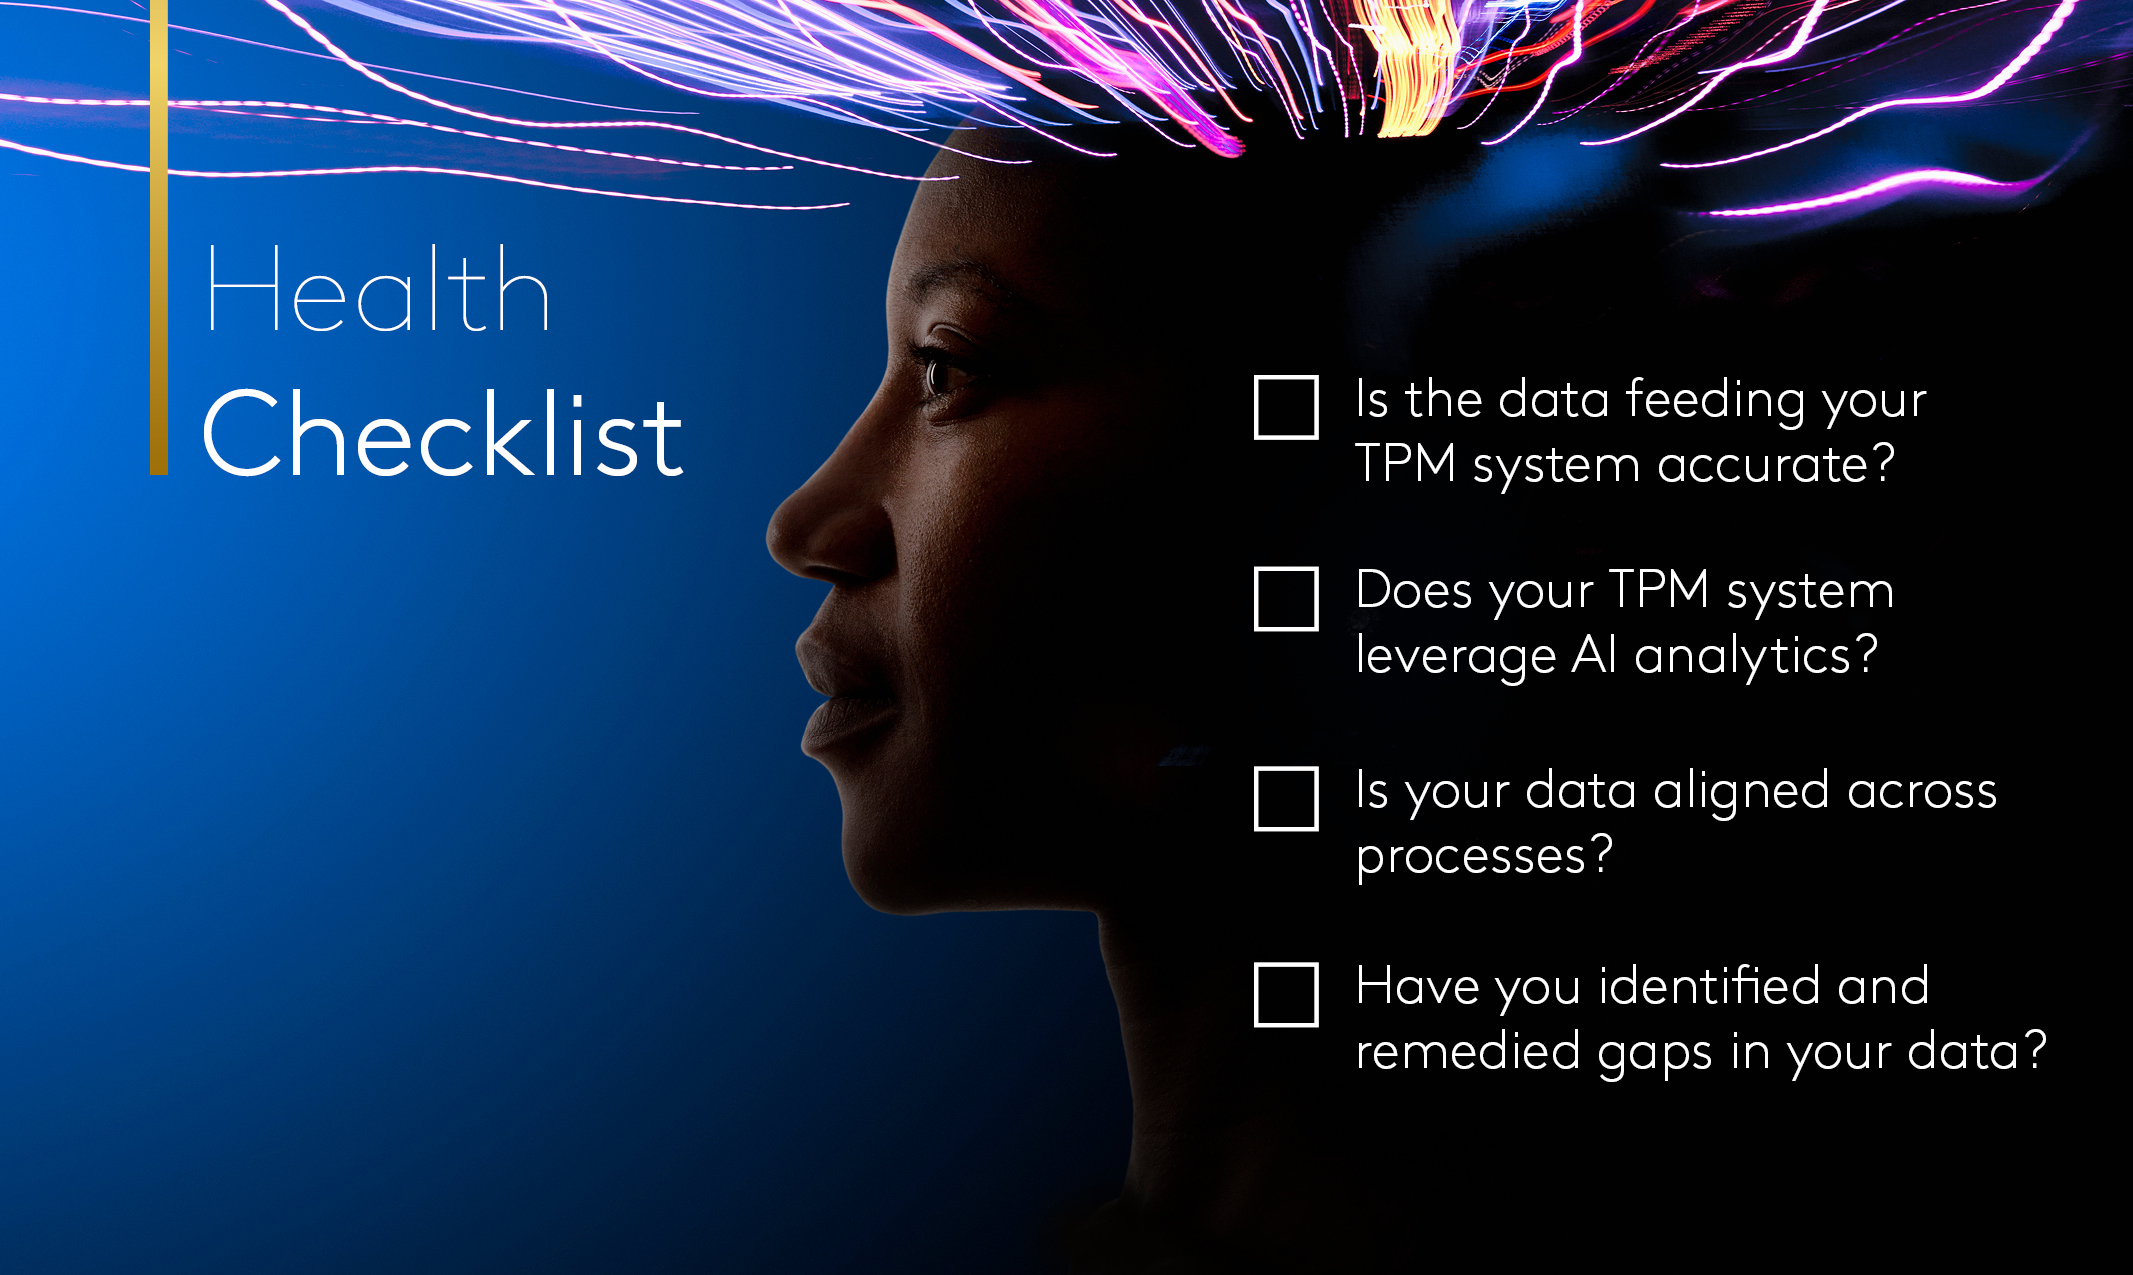 Trade Promotion Management checklist for data and analytics